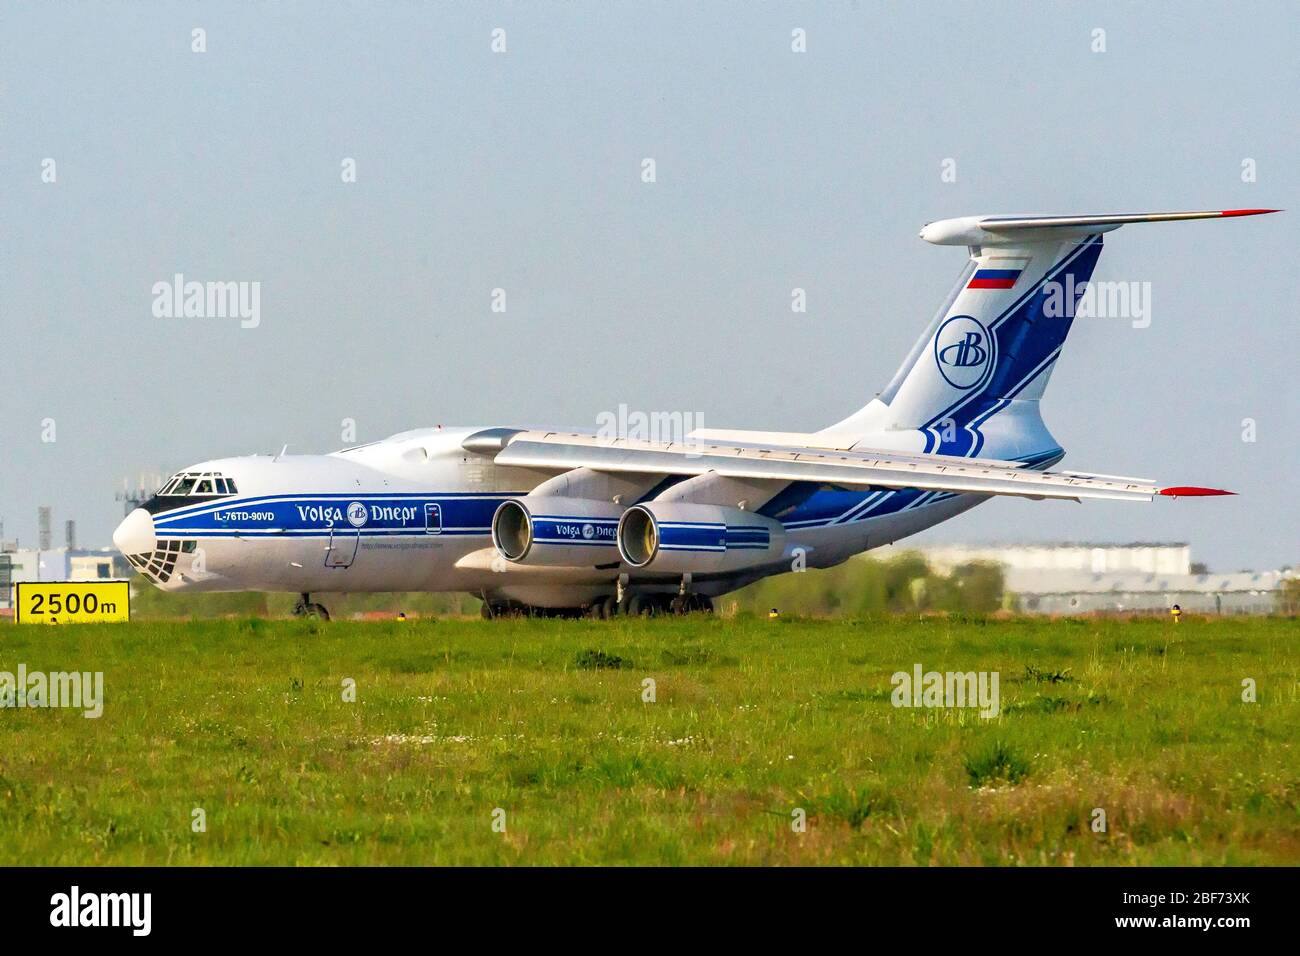 16 april 2020 Maastricht, The Netherlands Airplanes leaving the Airport Iljoesin IL76TD-90 VD cargo vliegtuig Iljoesin IL76TD-90 VD cargo plane Stock Photo